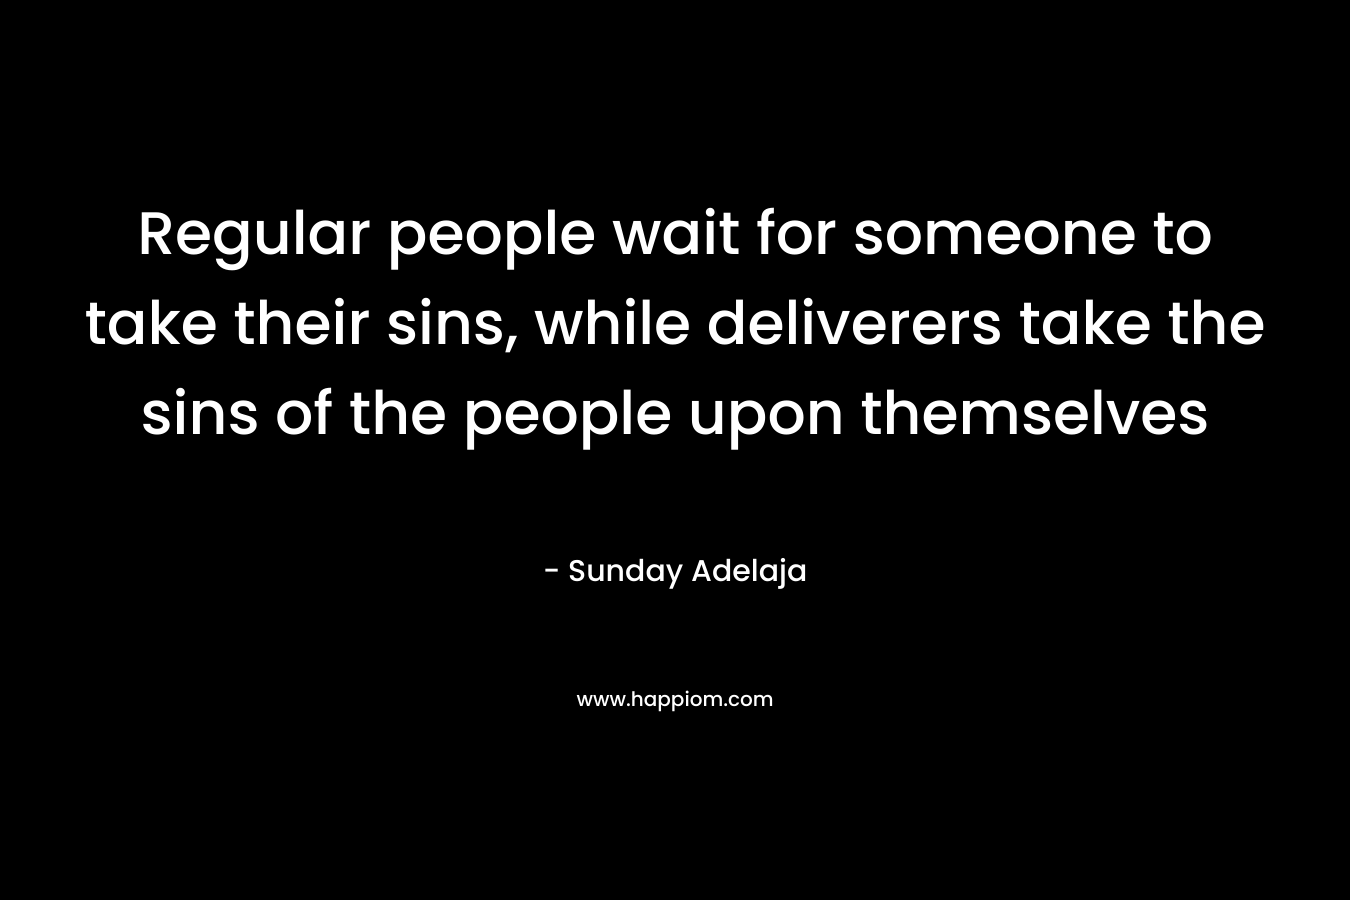 Regular people wait for someone to take their sins, while deliverers take the sins of the people upon themselves